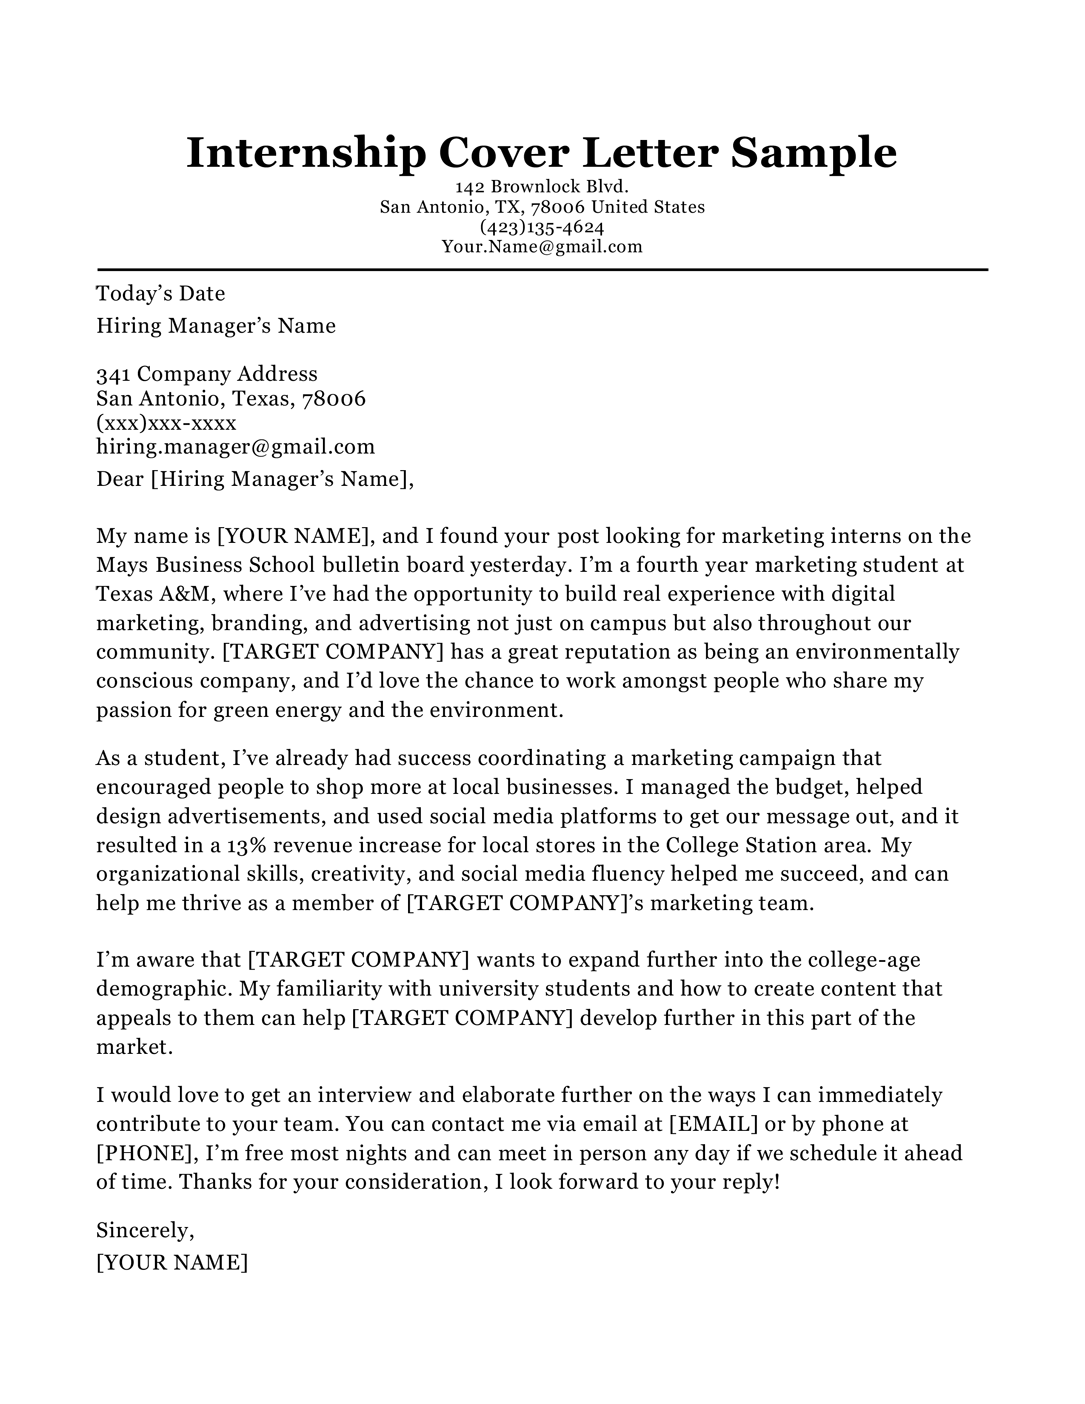 Cover Letter For University Application from resumecompanion.com